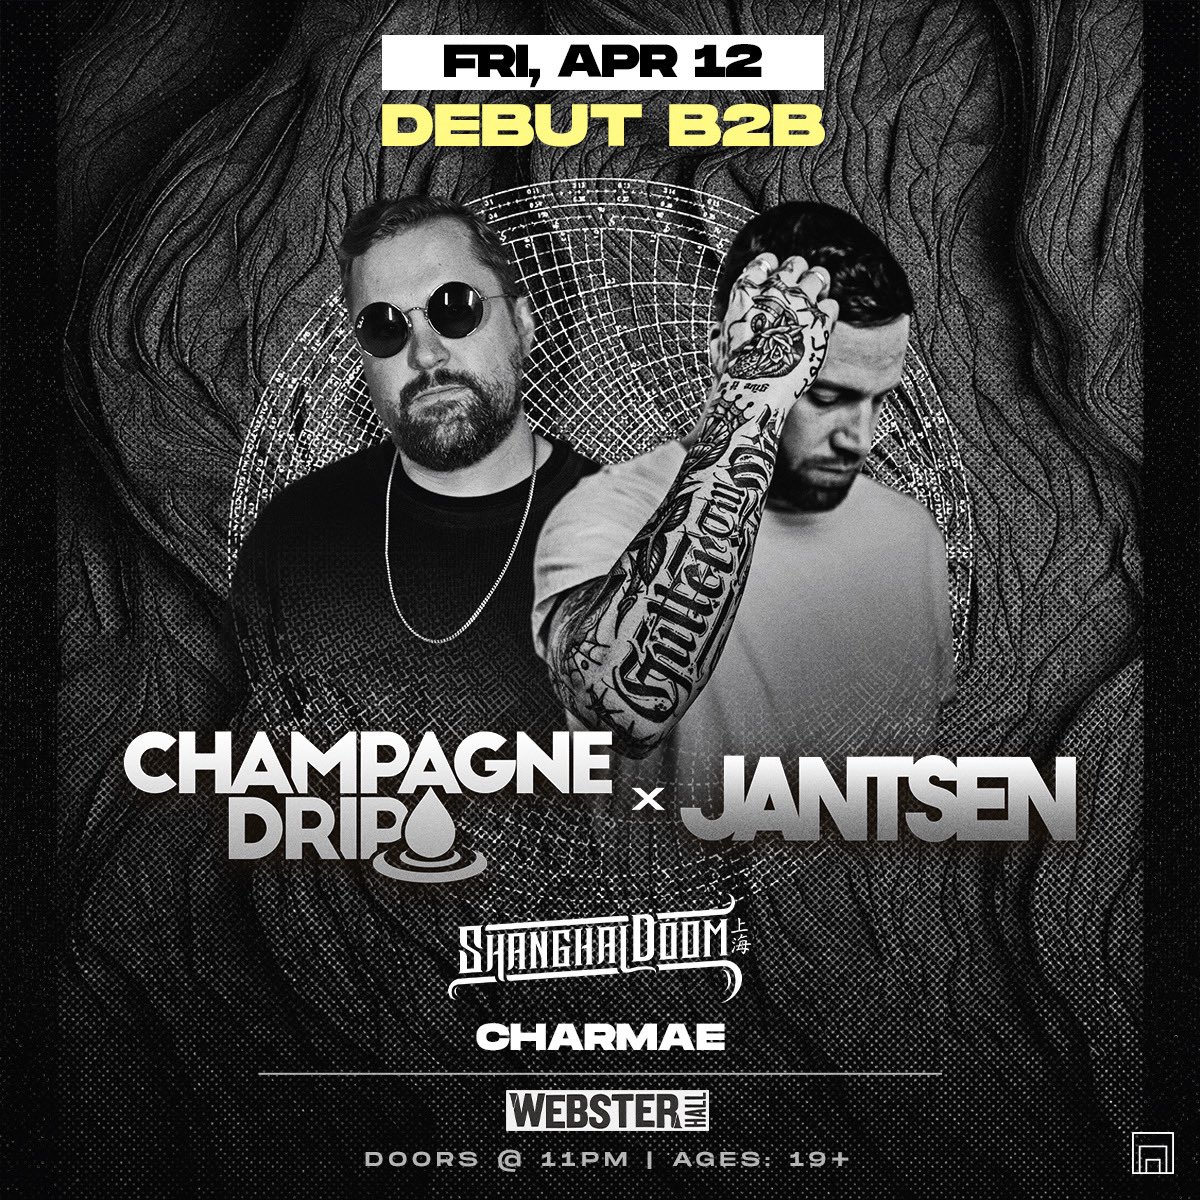 Webster Hall NYC!! We’re coming through on 4/12 to support the homies @jantsenmusic x @ChampagneDrip for their debut b2b!! See yall there 🫡